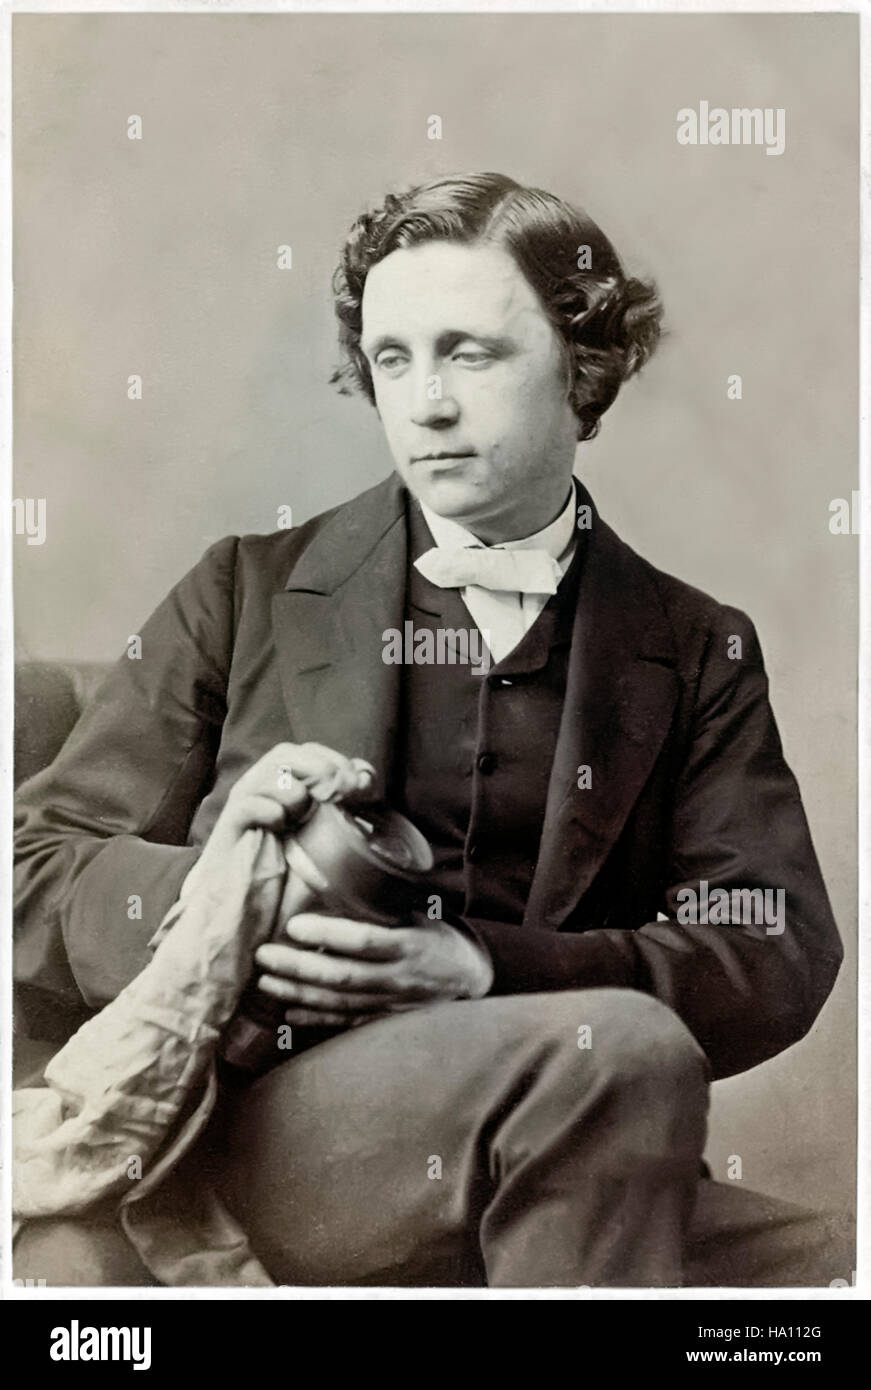 Lewis Carroll (1832-1898), English author, mathematician and photographer. Born Charles Lutwidge Dodgson, he adopted the pen name Lewis Carroll publishing Alice's Adventures in Wonderland in 1865. See description for more information. Stock Photo